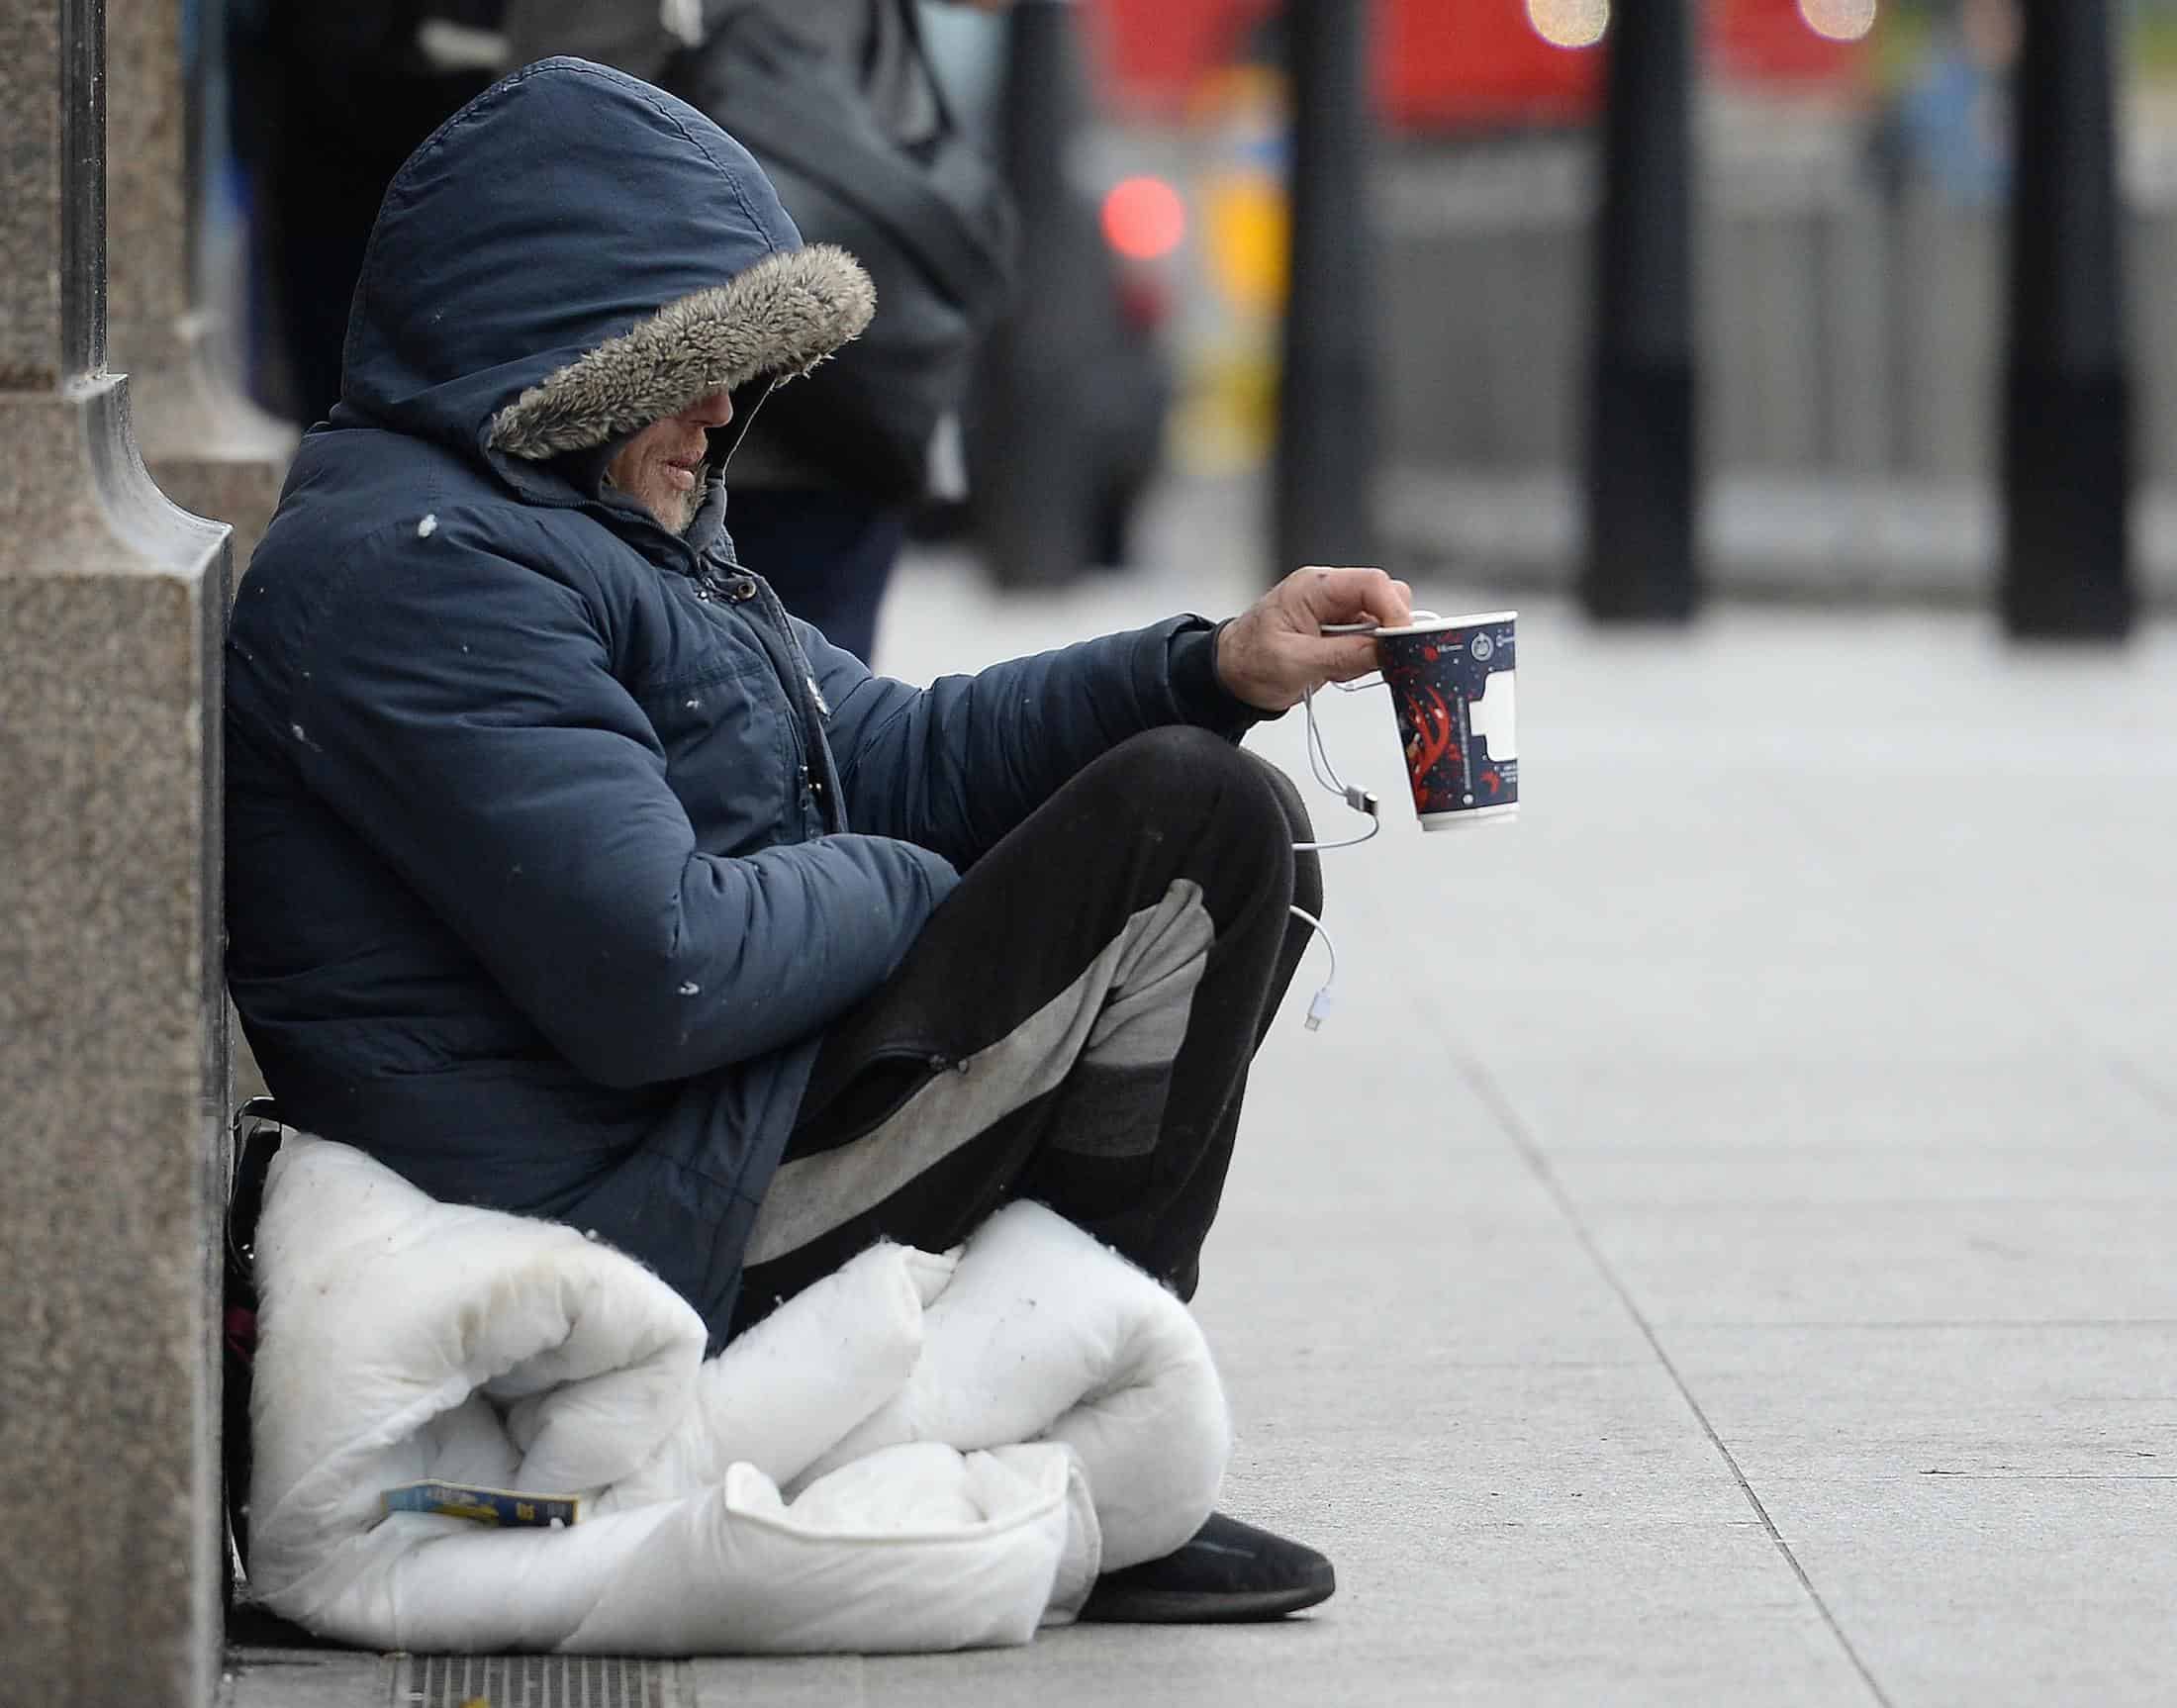 Tens of thousands of London families homeless over Christmas